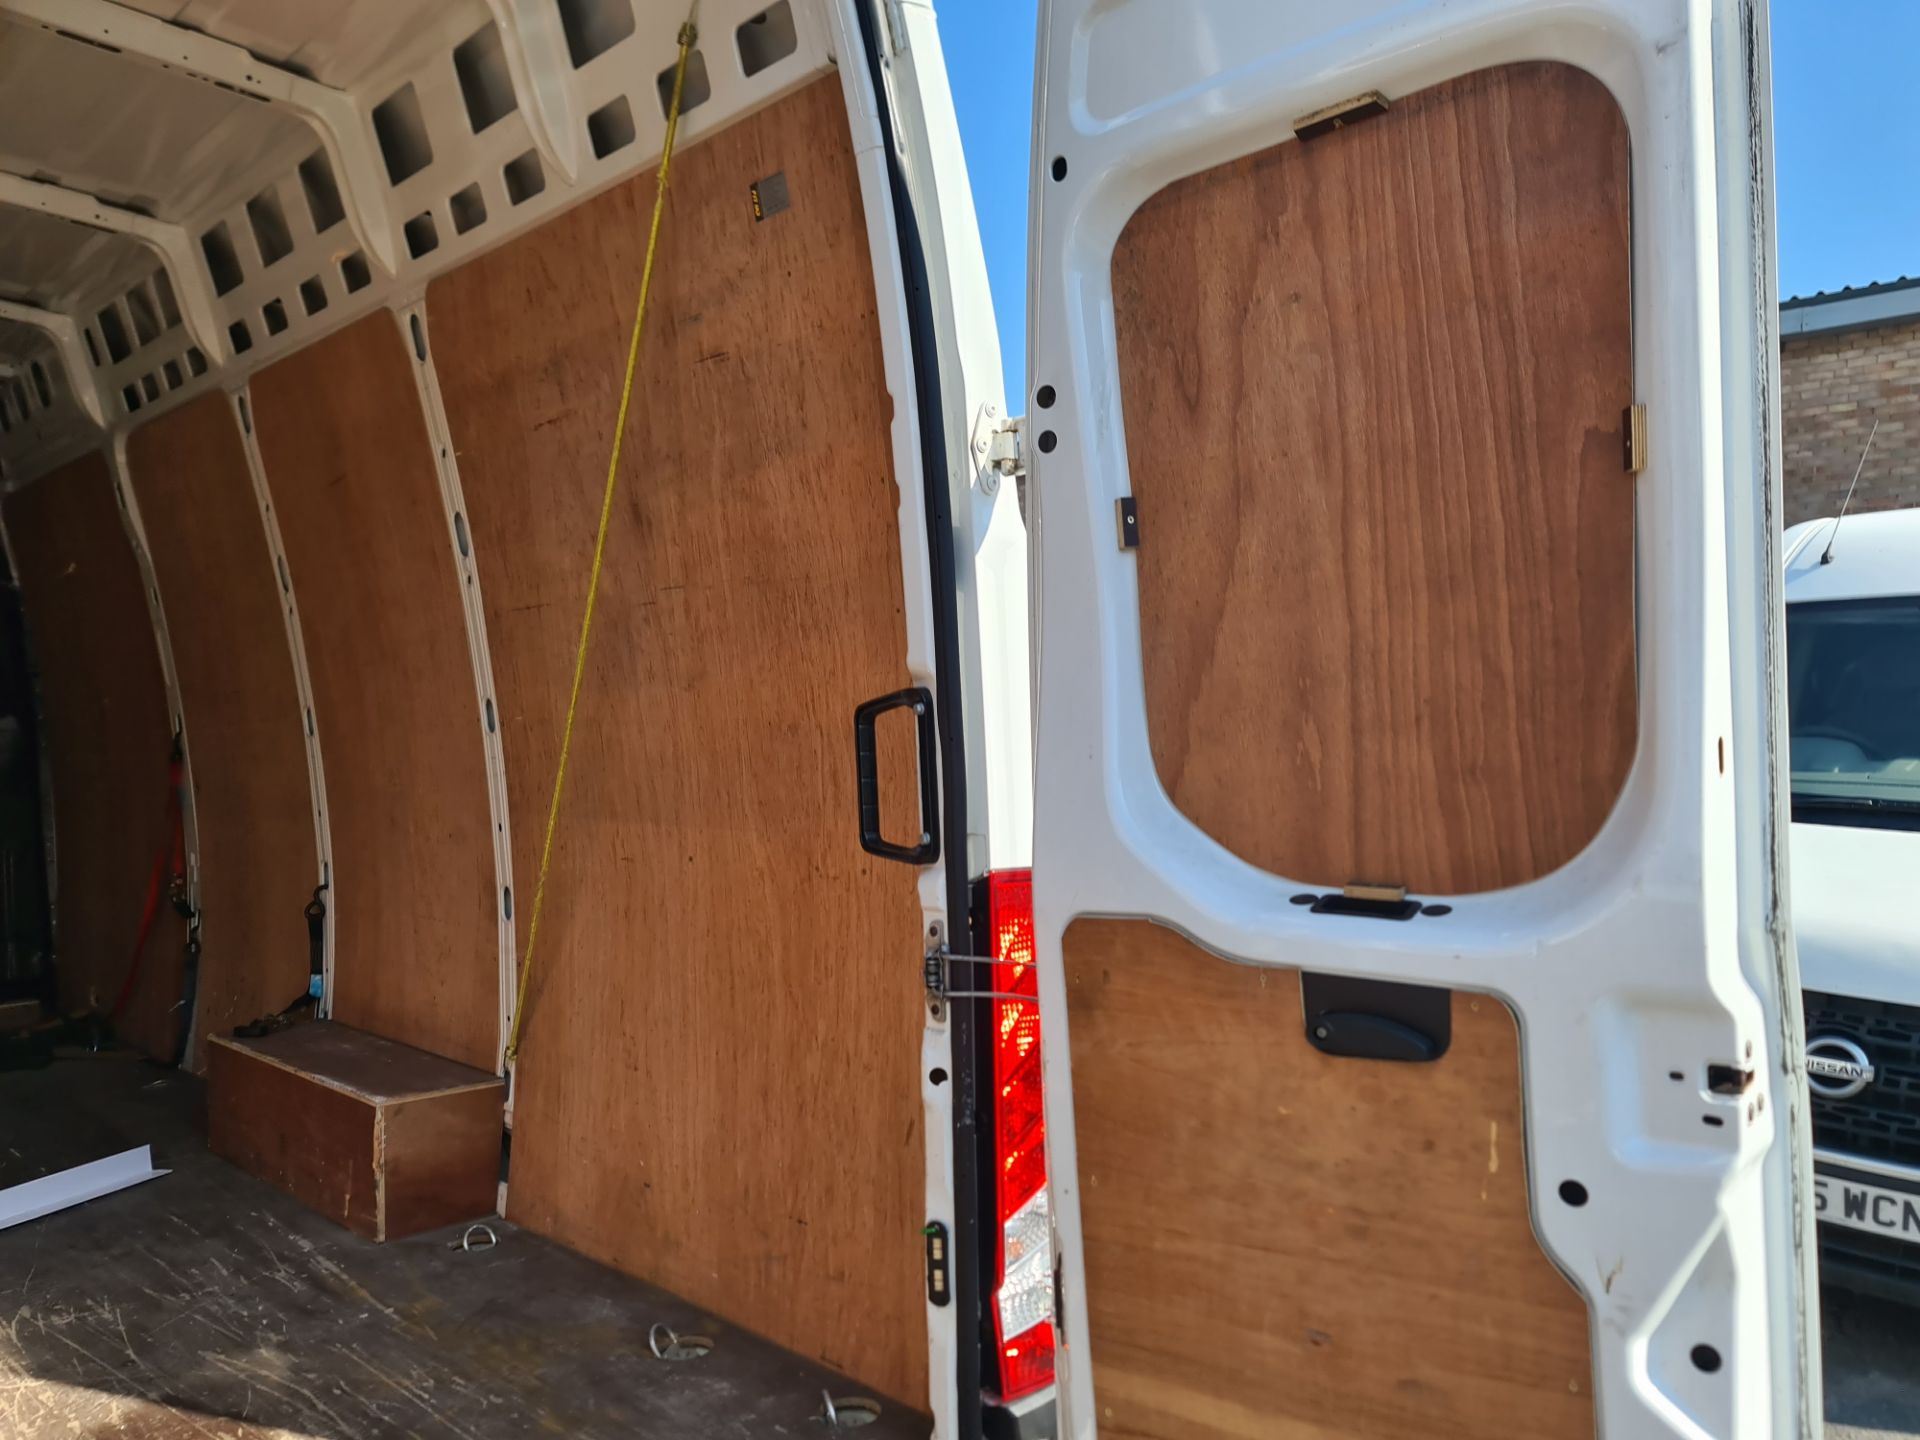 2020 Iveco Daily LWB high roof panel van - Image 19 of 21